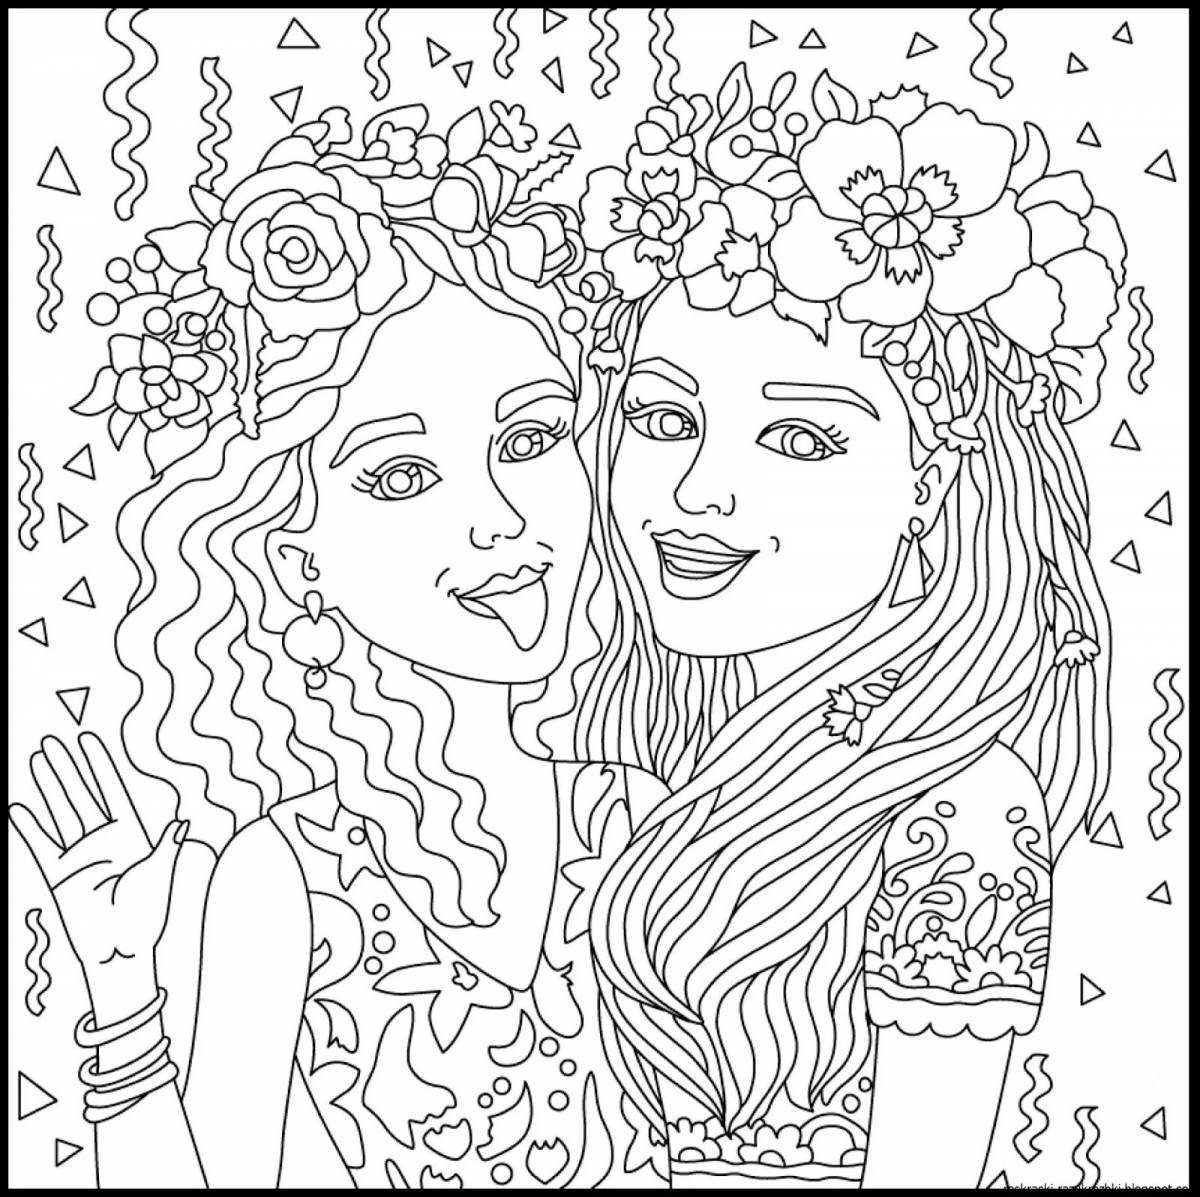 Color explosion coloring book for girls 14 years old